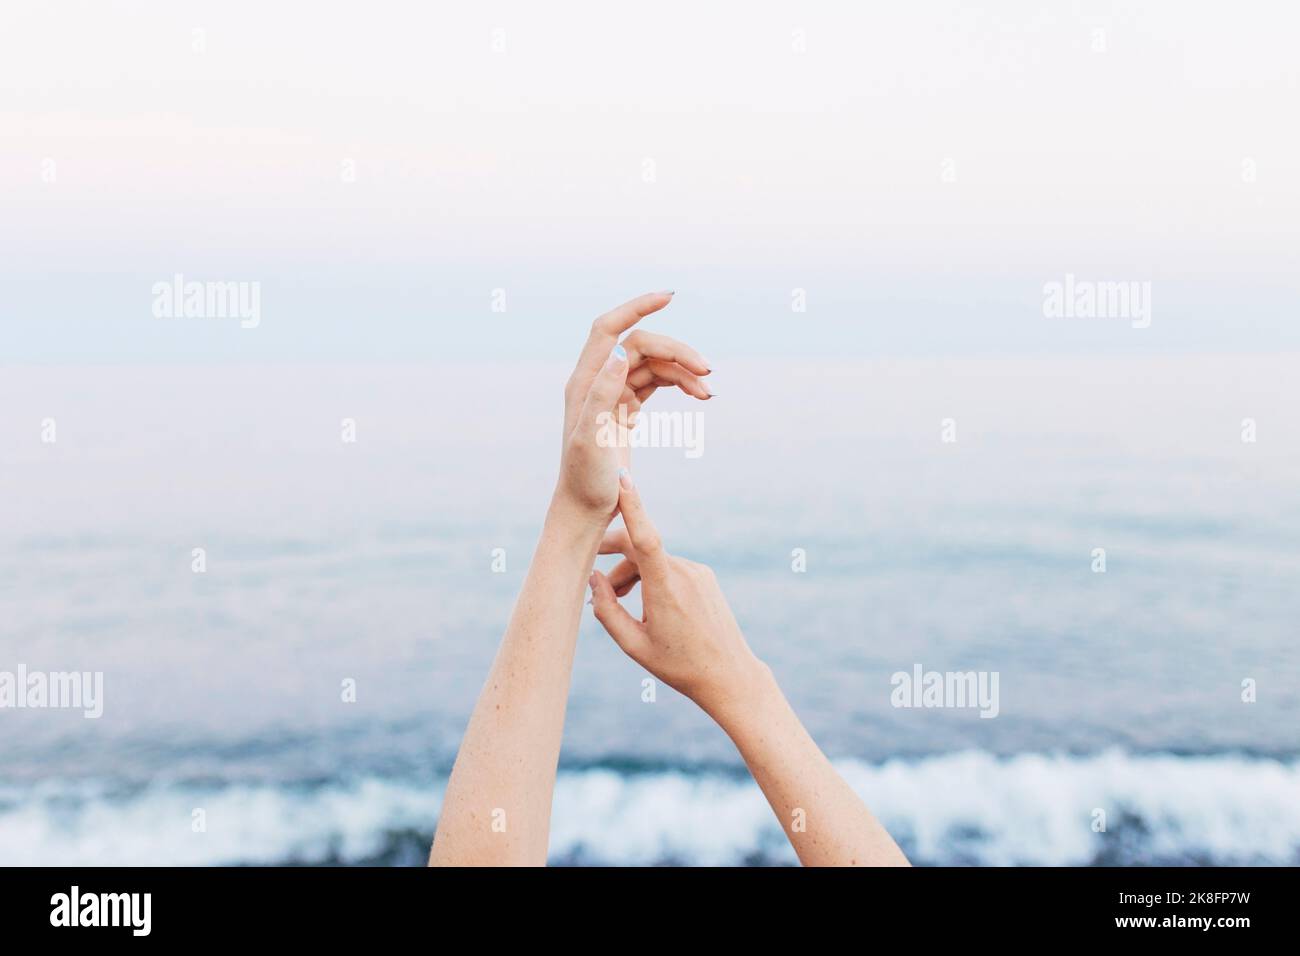 Hands of woman in front of sea Stock Photo